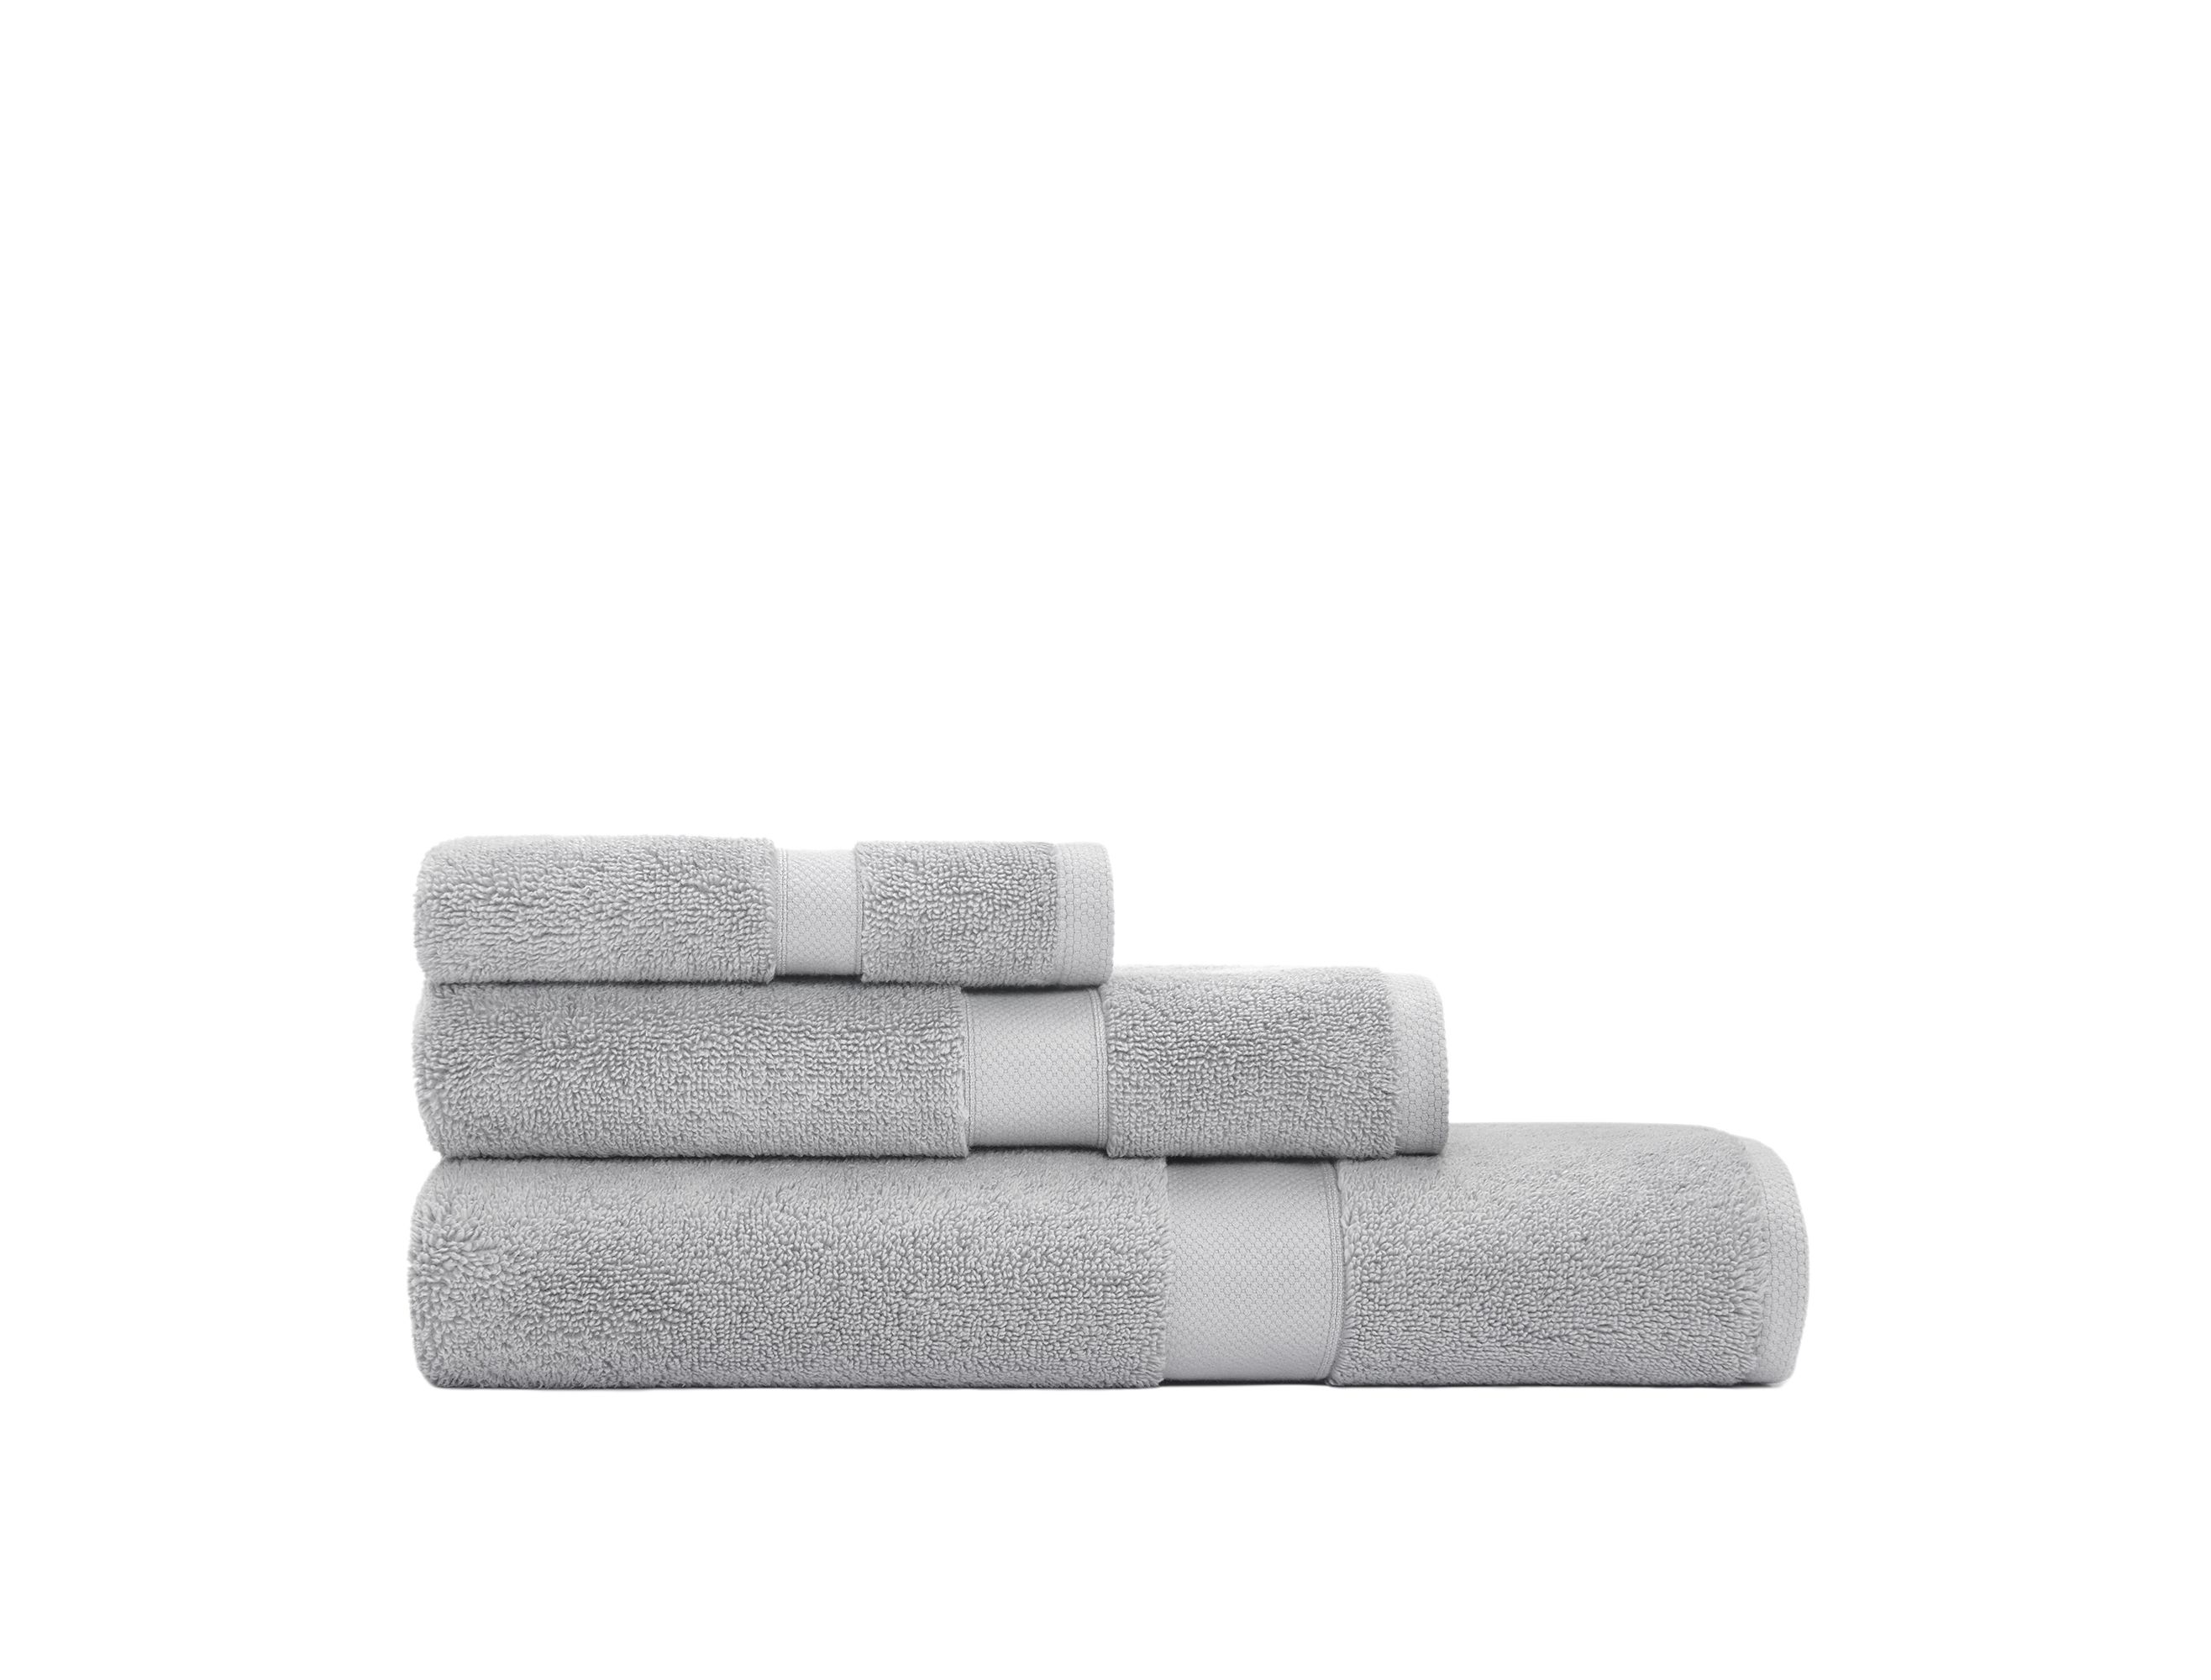 Supremely soft against the skin and equally absorbent the Tracy Towel Collection from Calvin Klein is a soothing way to begin and end the day. Made of fine 600 GSM 100% cotton these iconic towels feature the signature Calvin Klein logo and a flat band dobby border Available in a range of colours - white, beige, dusty blue, grey, midnight, wine, deep plum, charcoal and pink.